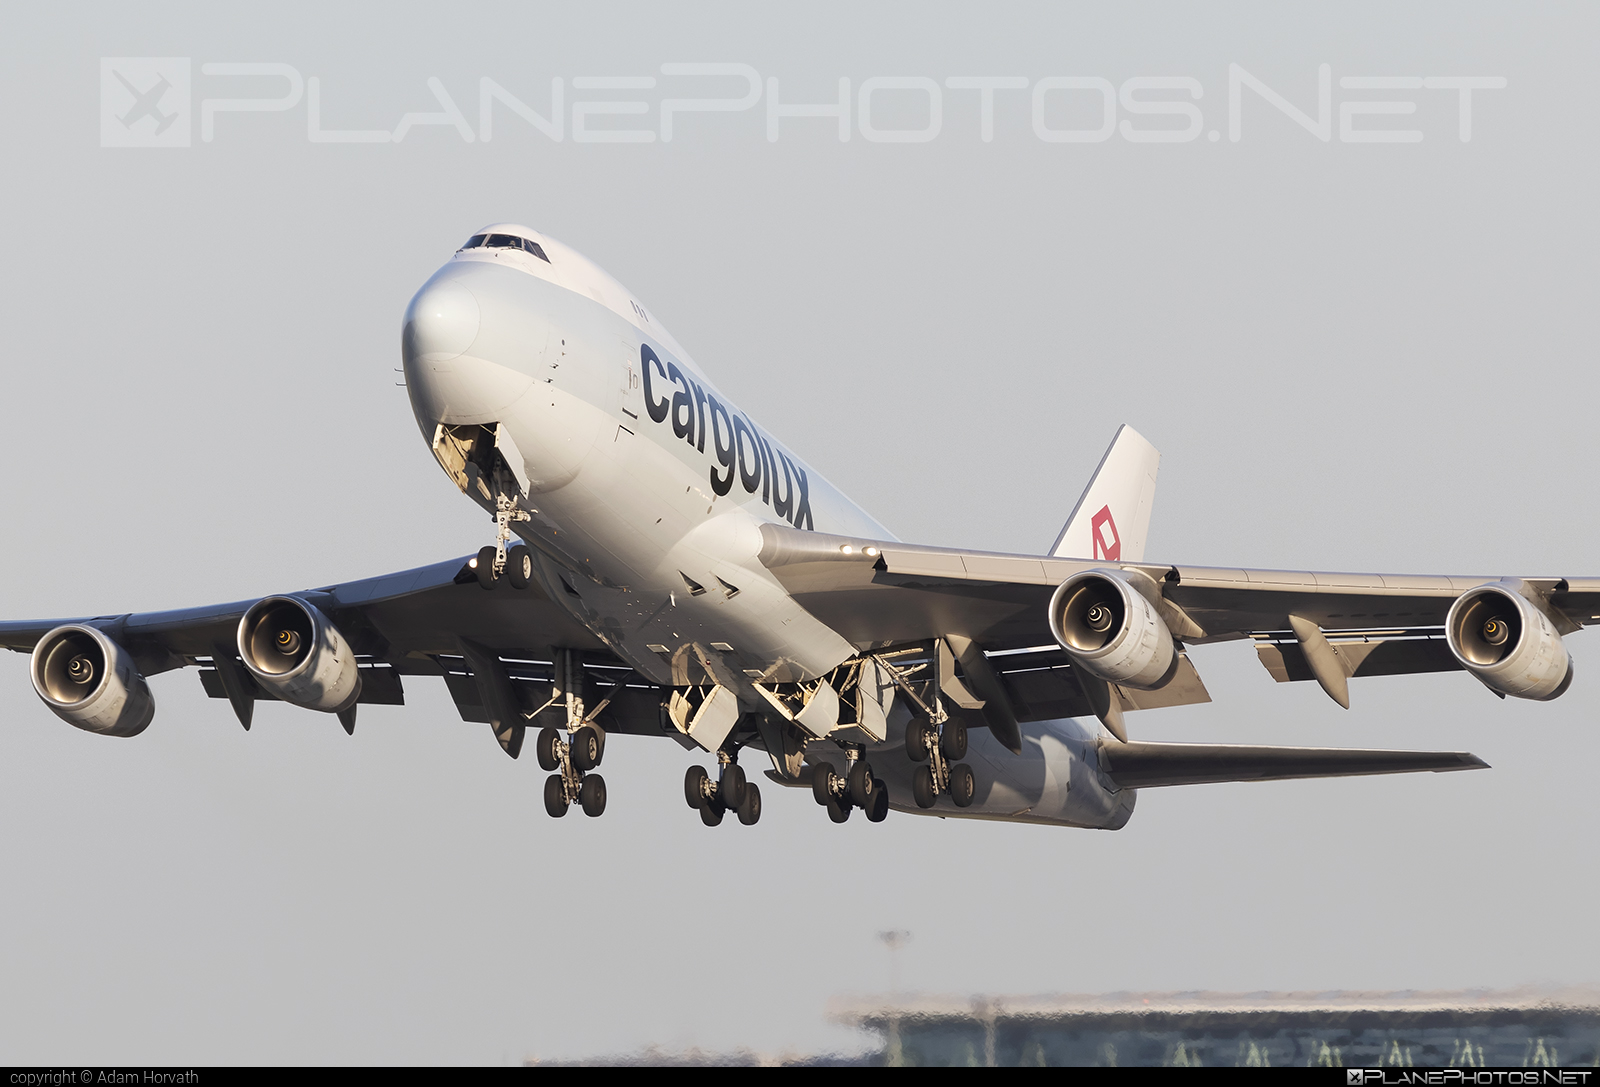 Boeing 747-400F - LX-ICL operated by Cargolux Airlines International #b747 #boeing #boeing747 #cargolux #jumbo